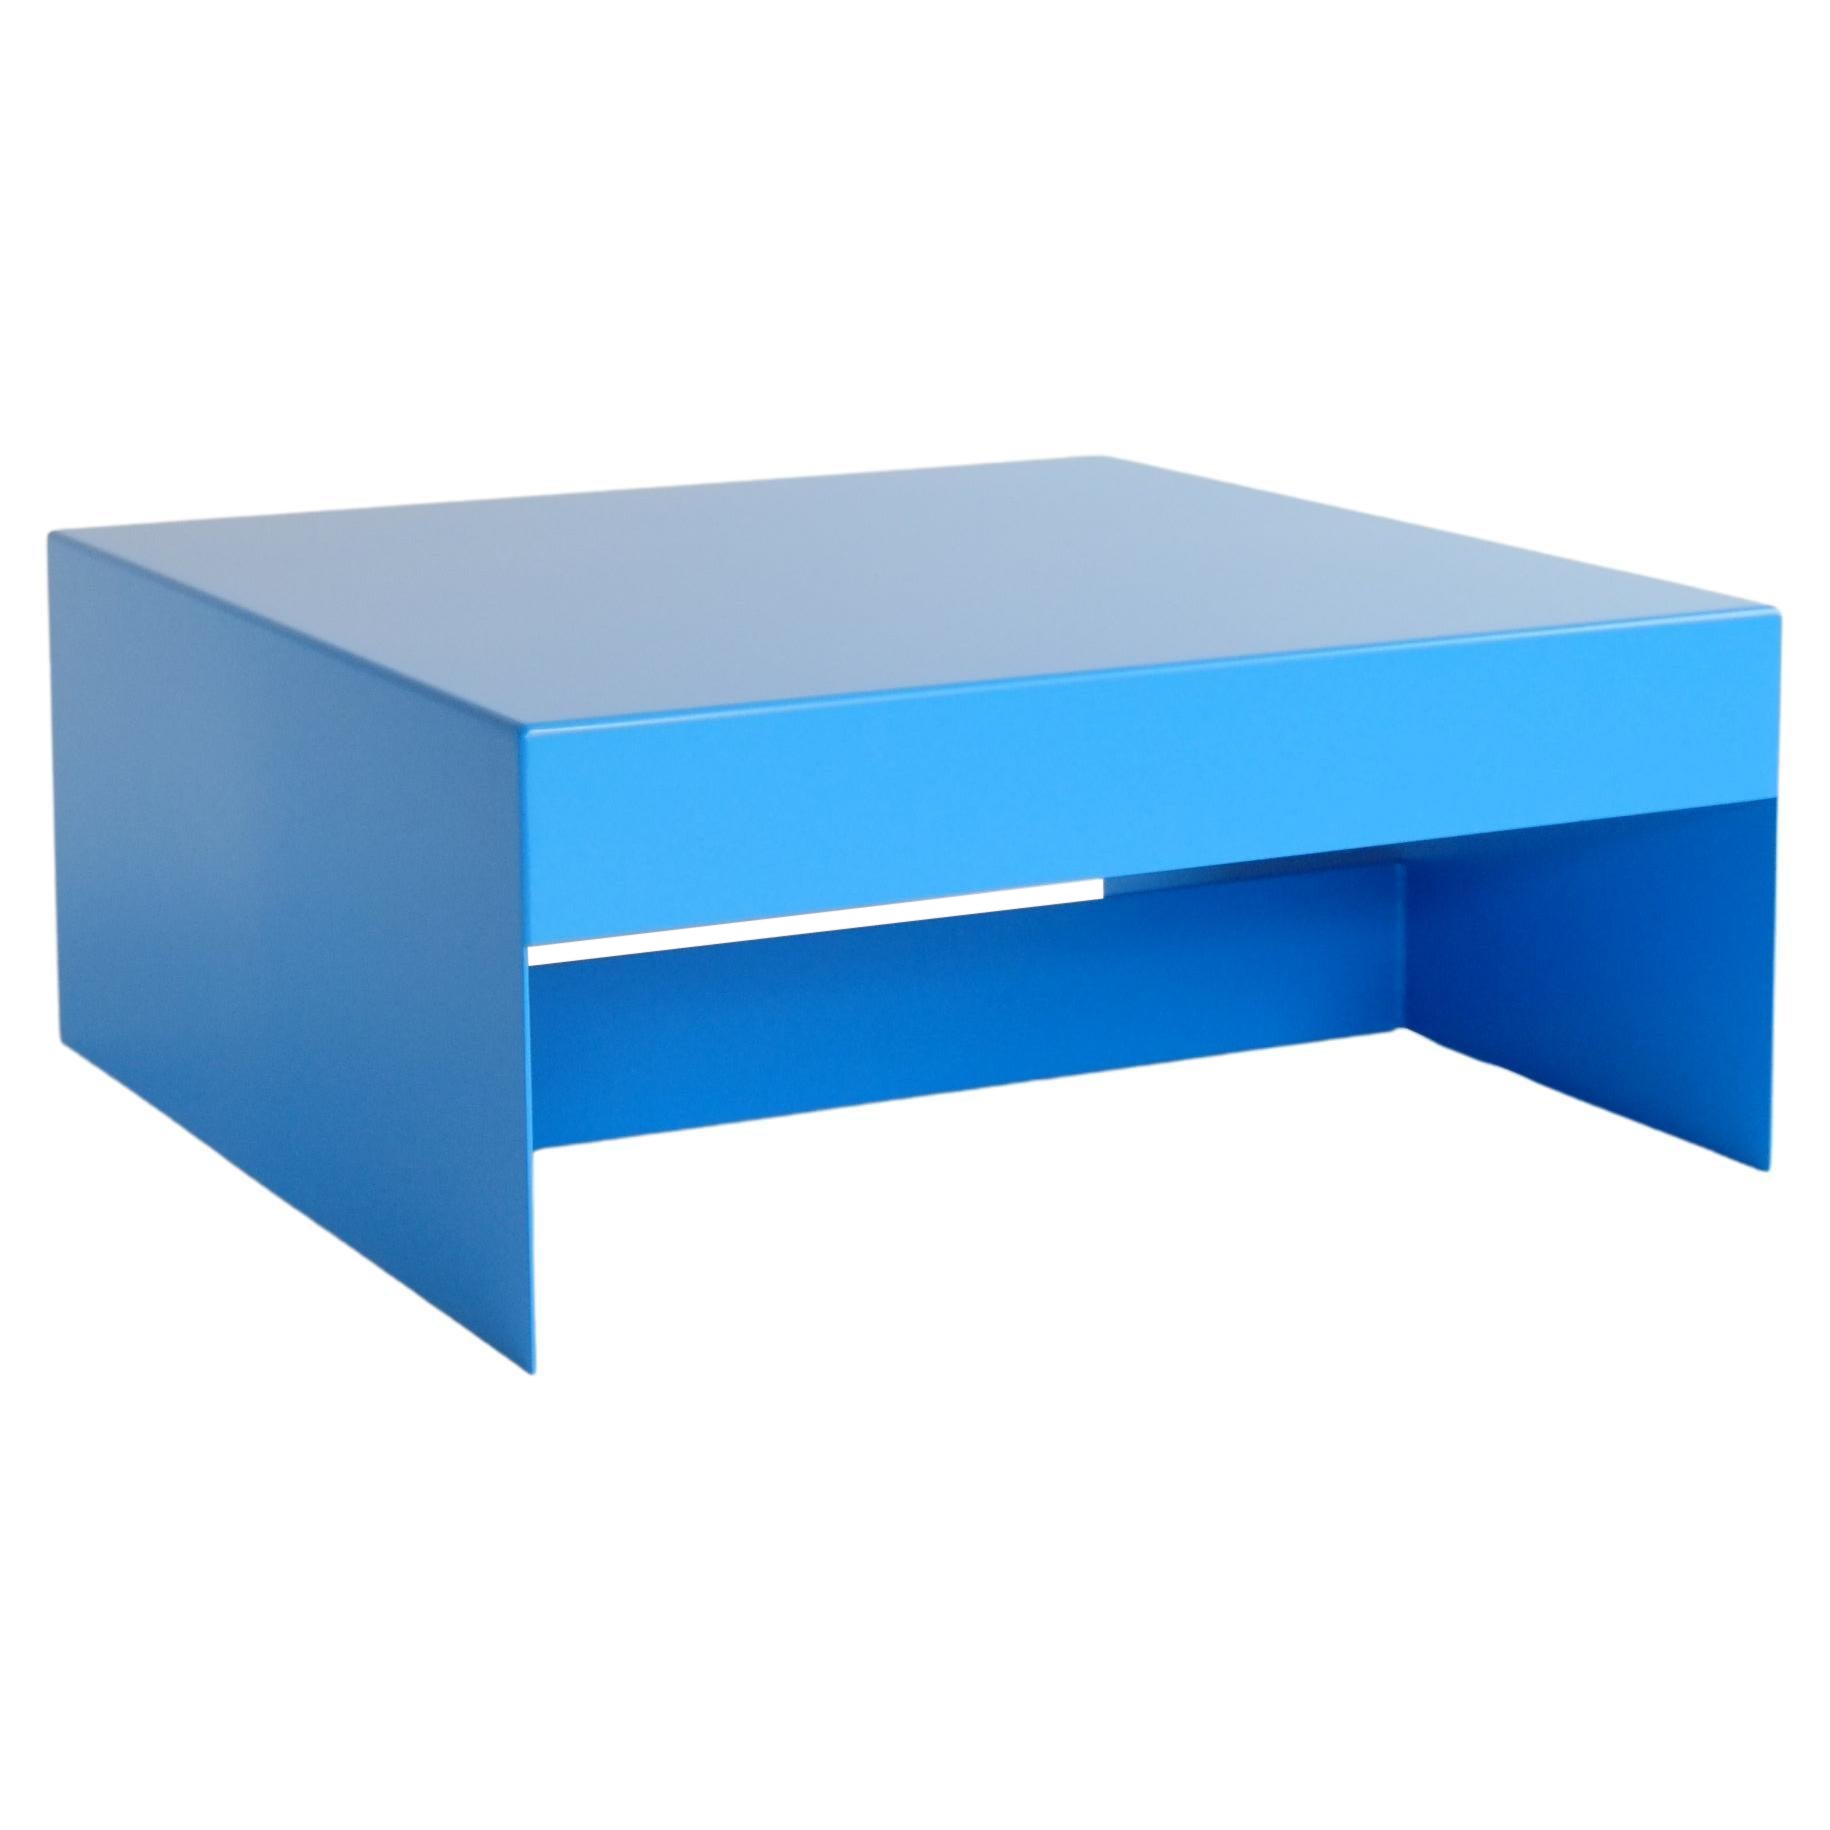 Blue Indoor / Outdoor Single Form Square Aluminium Coffee Table, Customisable For Sale